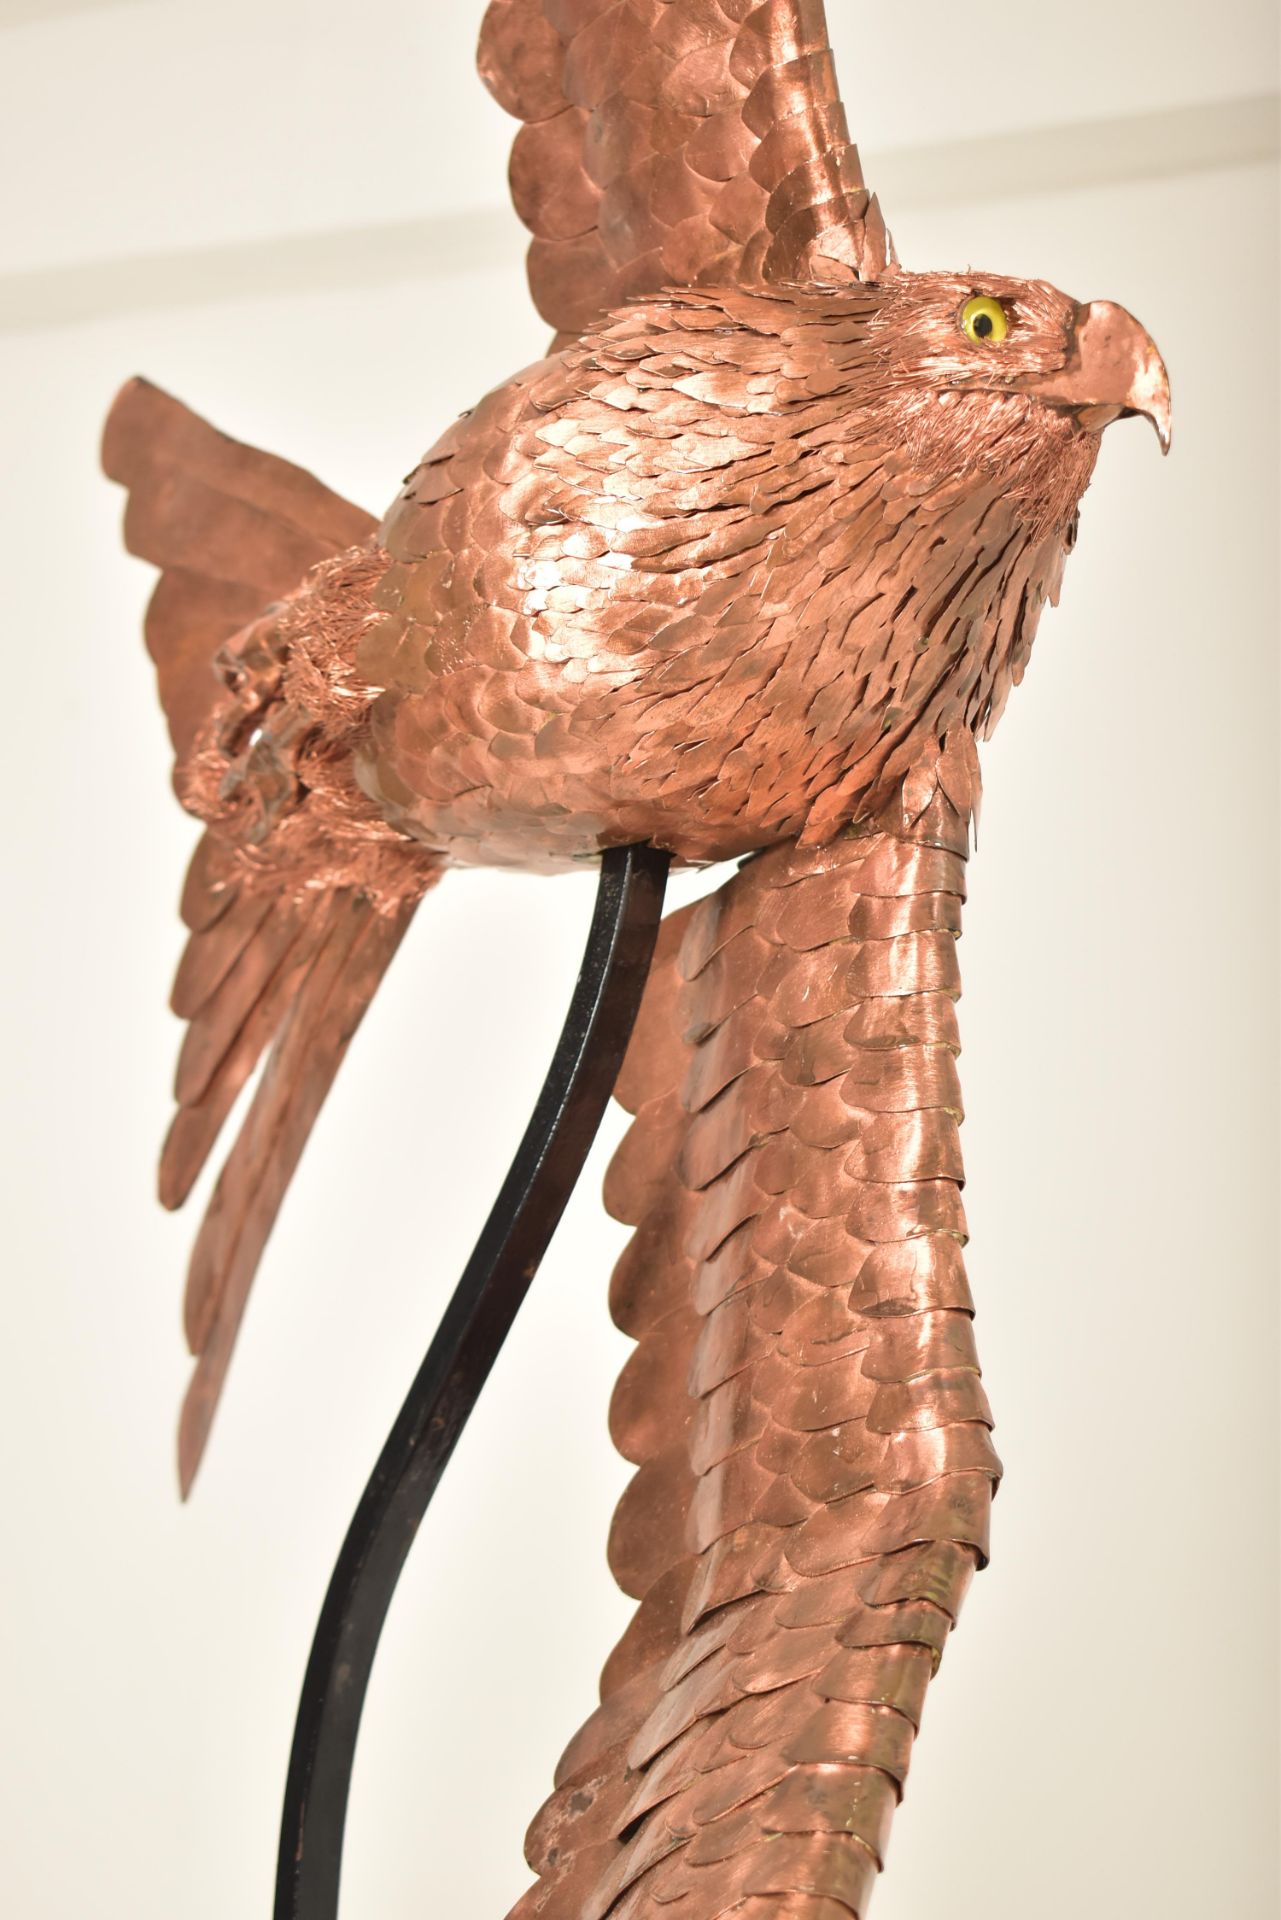 BOB ROWLEY - CONTEMPORARY COPPER WORKED RED KITE SCULPTURE - Image 2 of 6